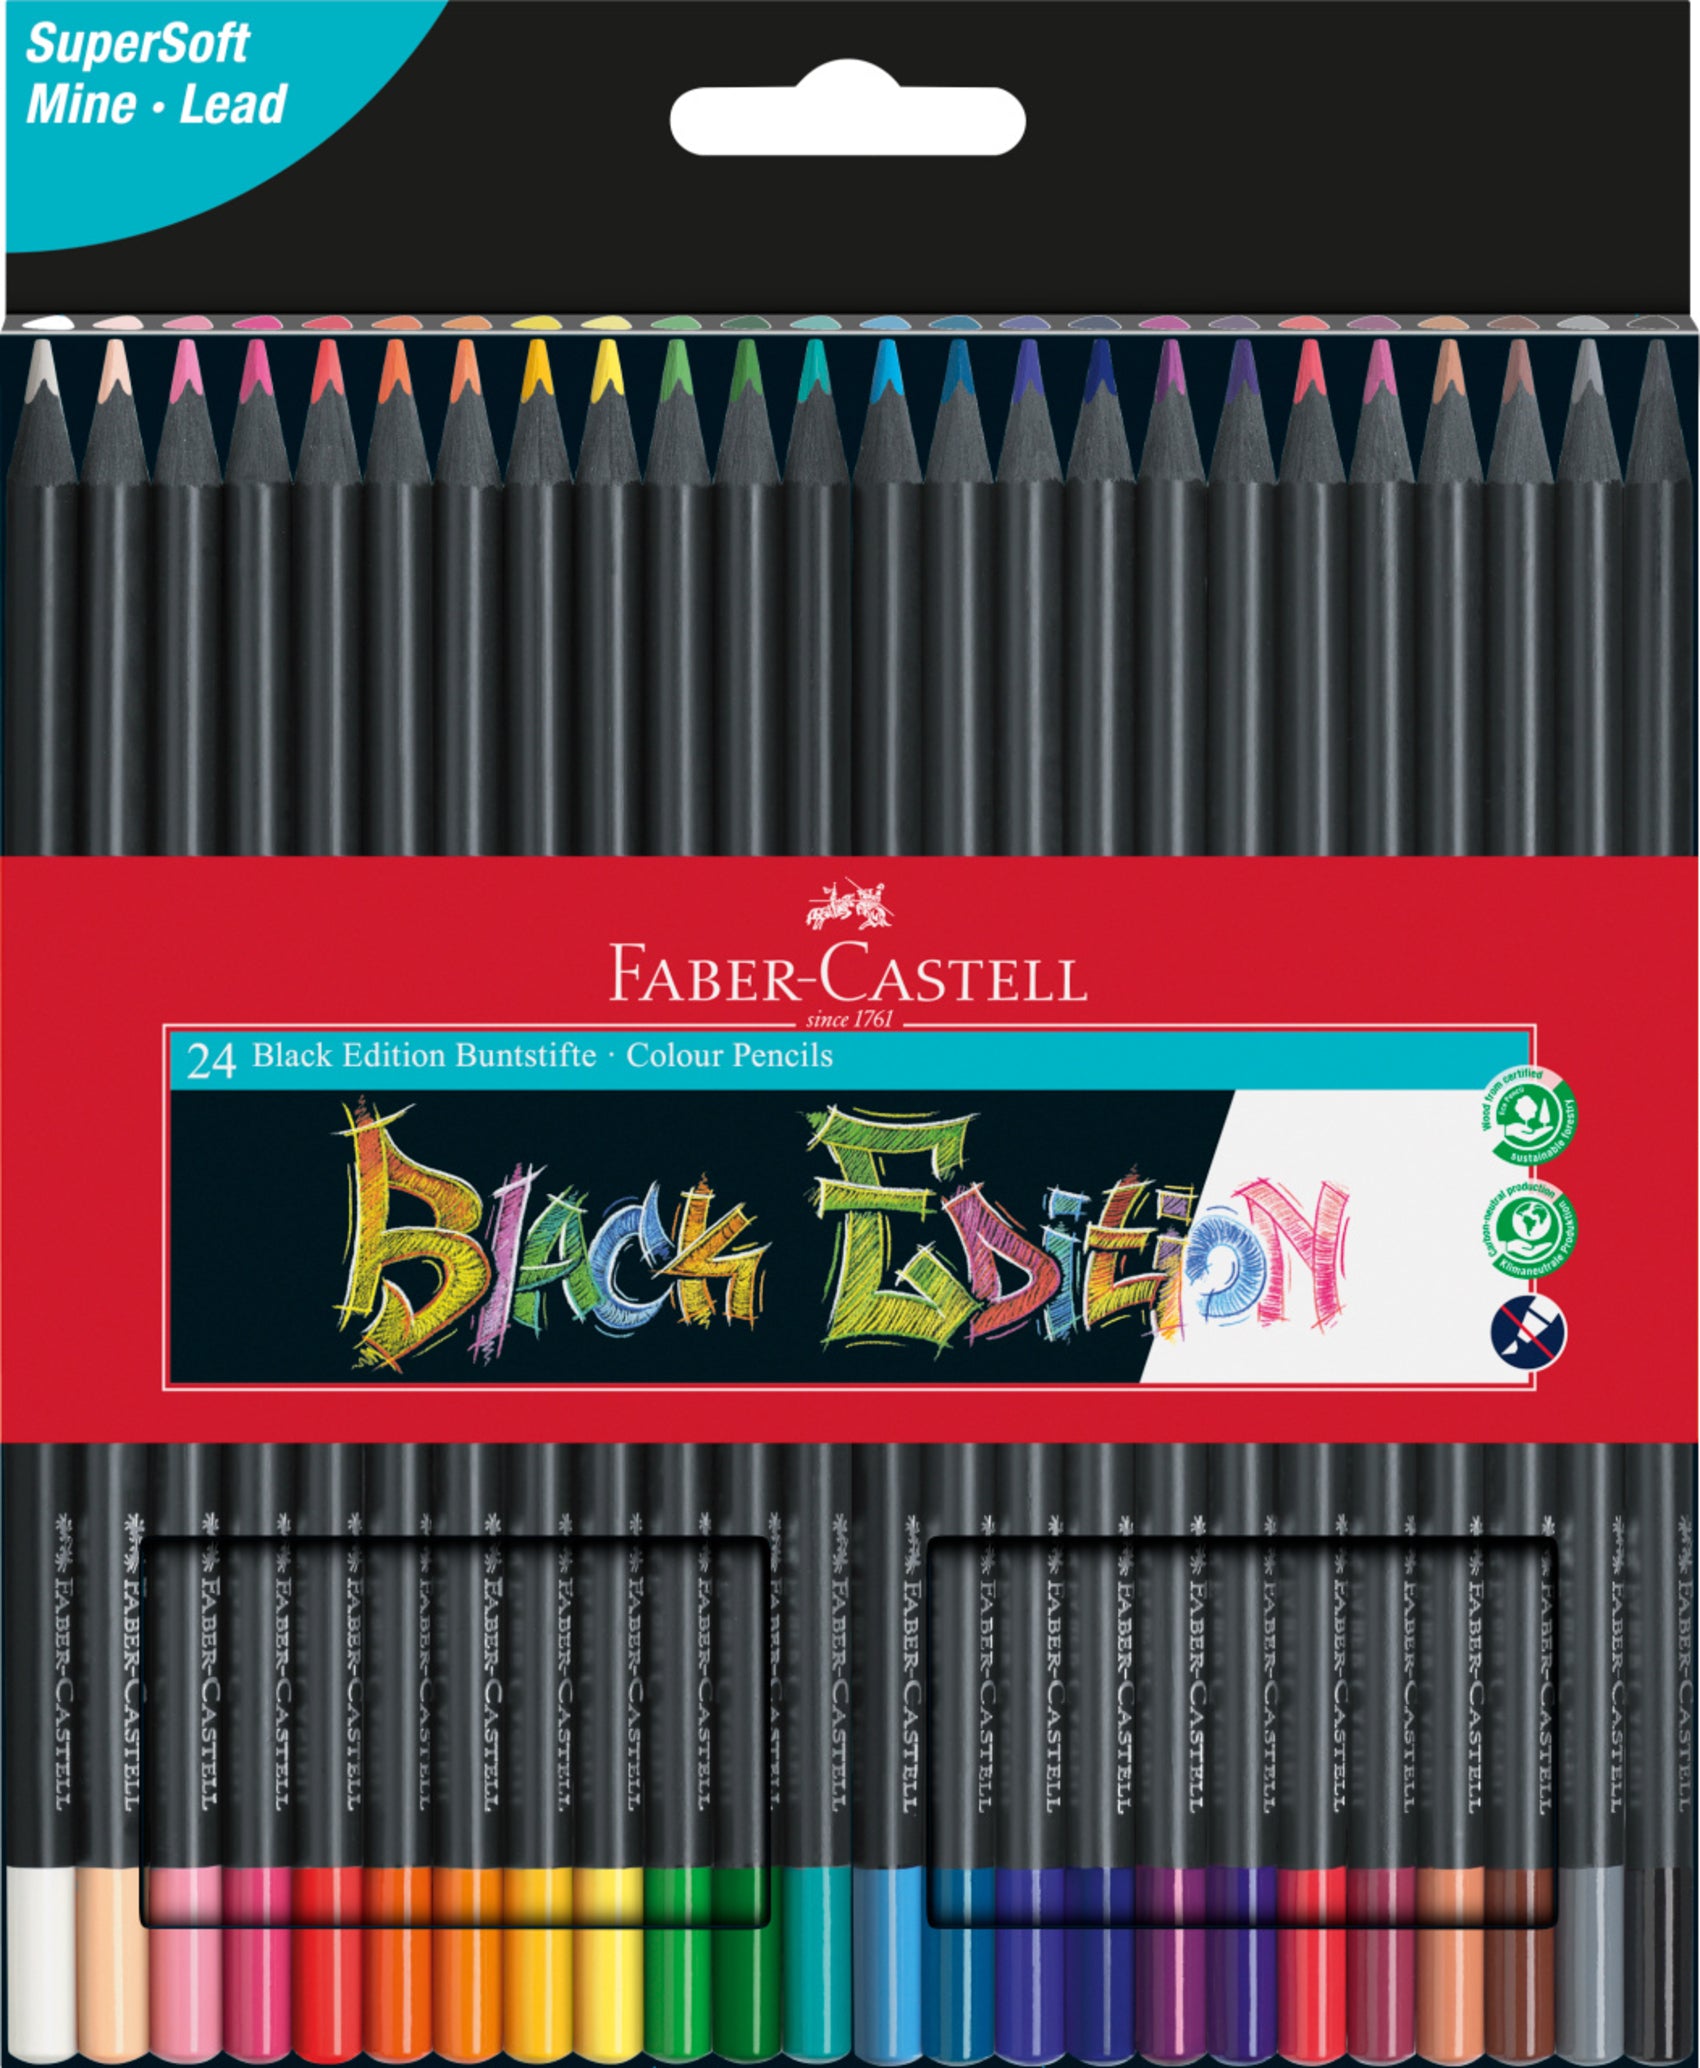 FABER CASTELL Faber-Castell Black Edition colour Pencil set of 24 Black Edition colour pencils are made of high-quality black wood from sustainable forestry.